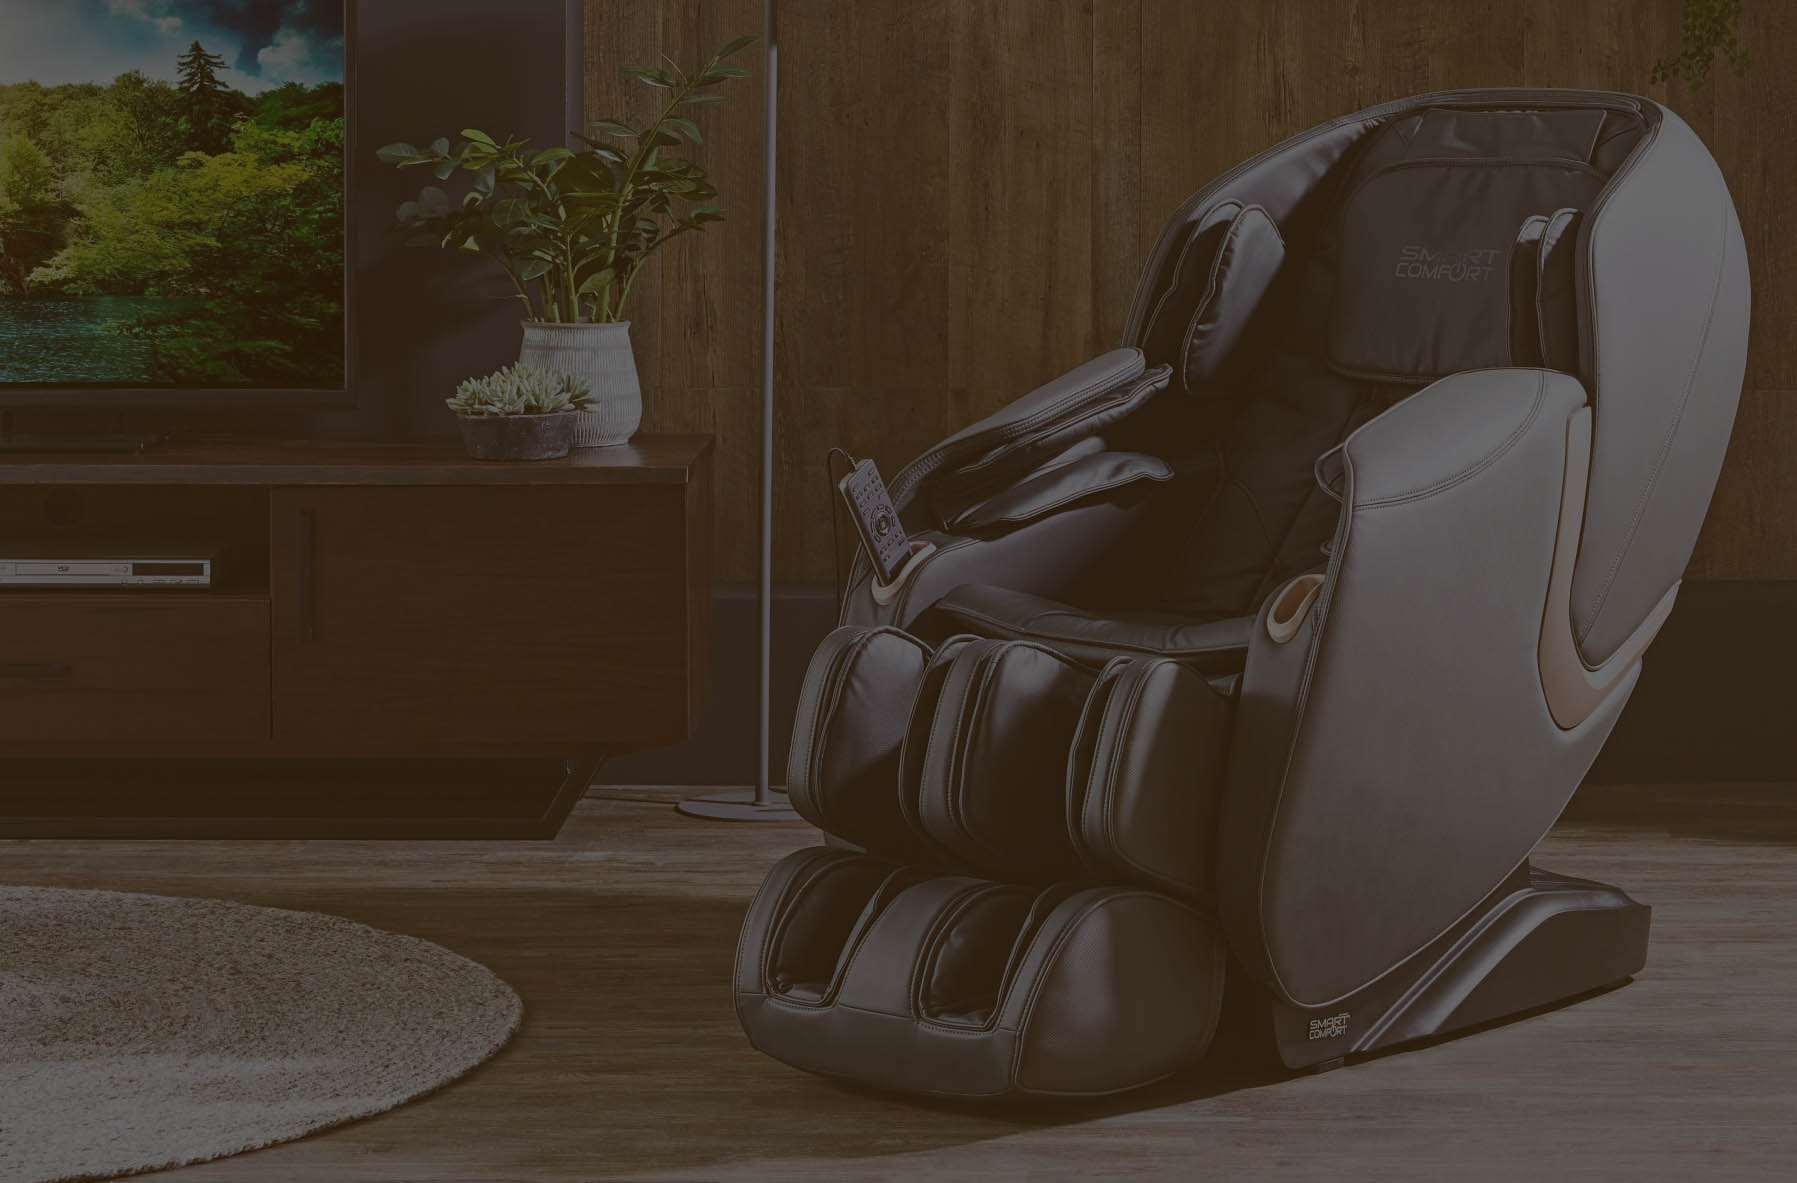 Massage Chair Repair In Chicago Suburbs Warranty On All Works